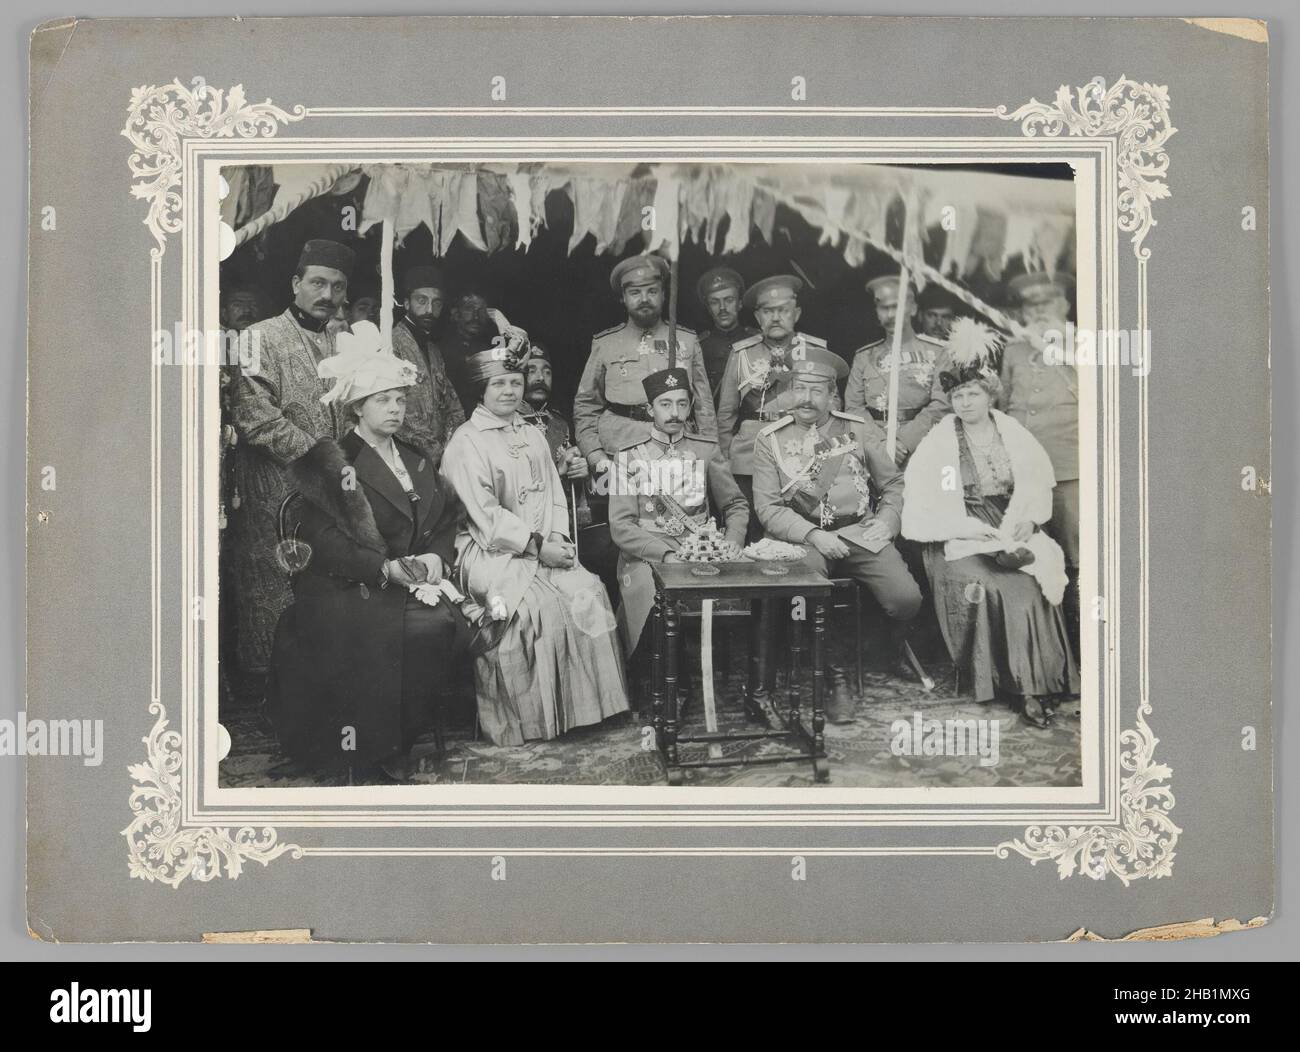 General Yanushkevich and the Russian Consul at a Garden Party given by the Persian Crown Prince at Tabriz, One of 274 Vintage Photographs, Gelatin silver printing out paper, 1916, Qajar, Qajar Period, photo: 6 5/8 x 9 1/8 in., 16.8 x 23.2 cm;, Azerbaijan, black and white, garden party, General Yanushkevich, hat, Iran, military, Persia, photo, Russia, uniform Stock Photo